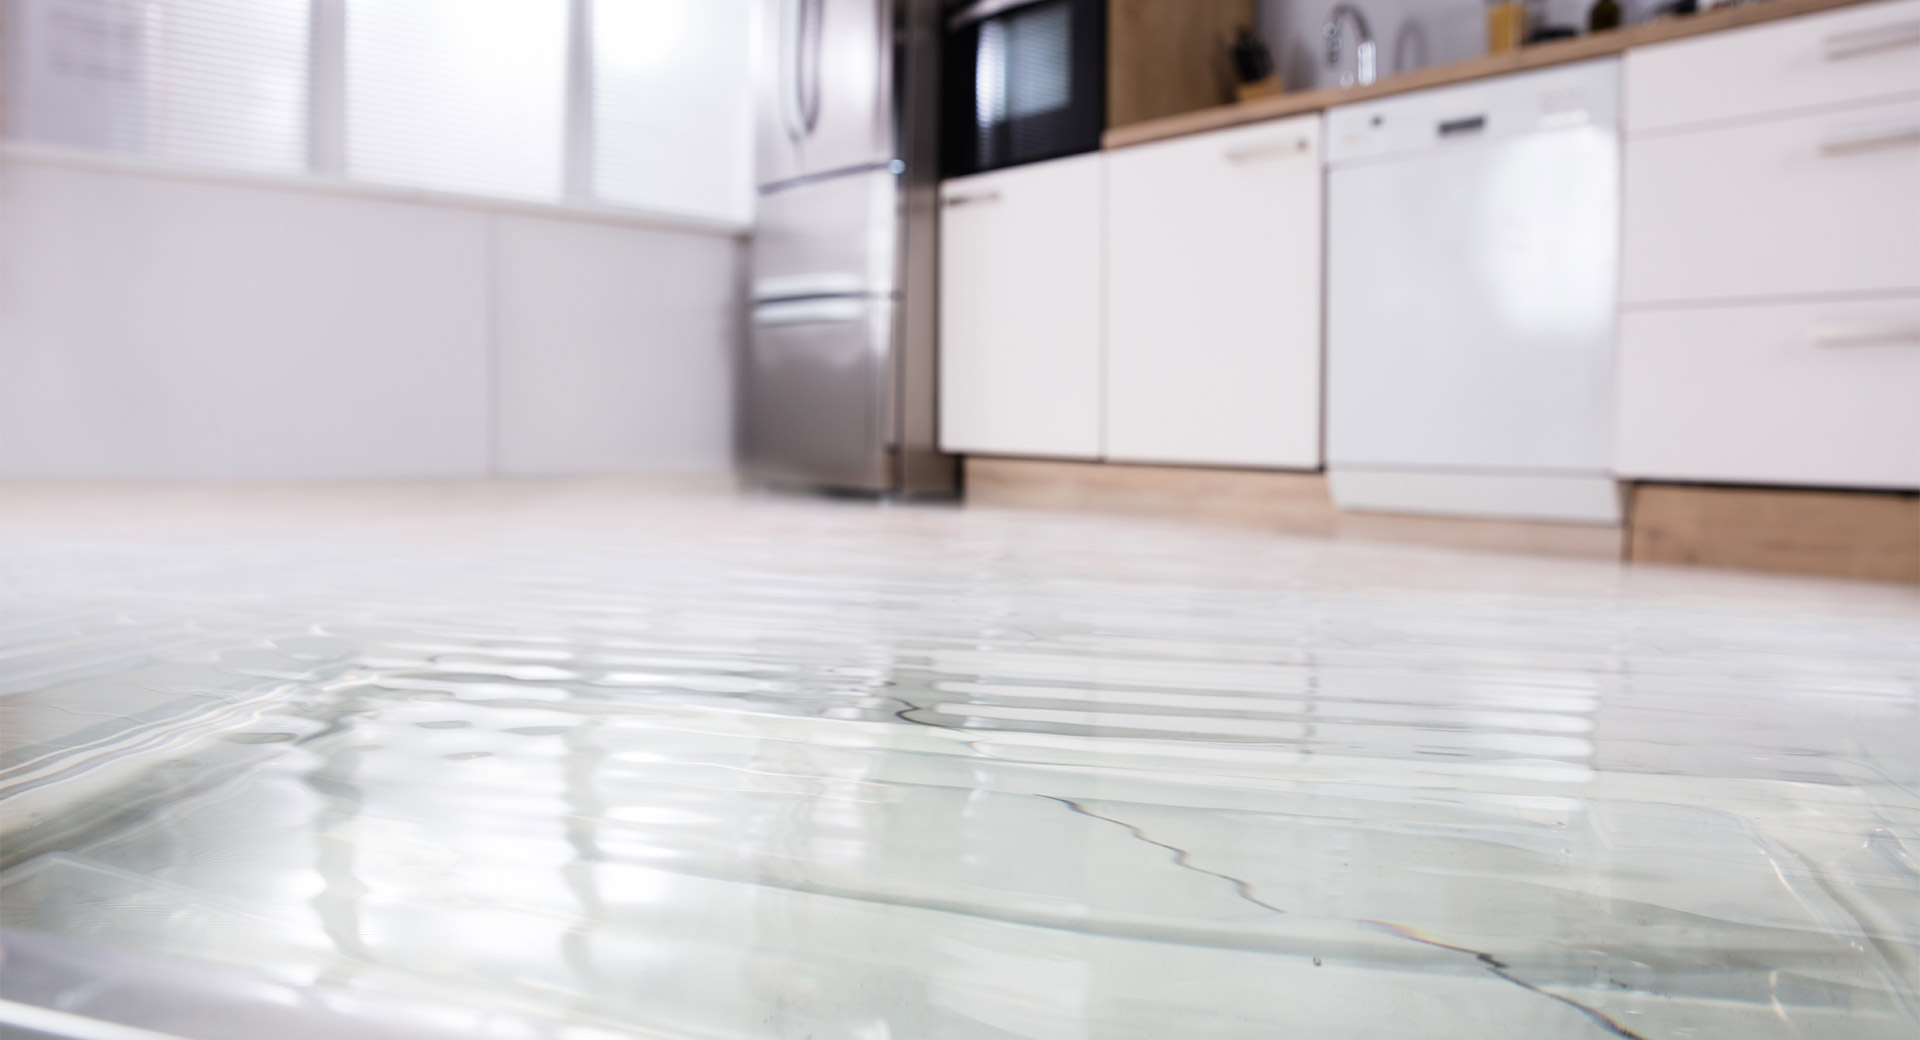 A kitchen with a flooded floor
                        